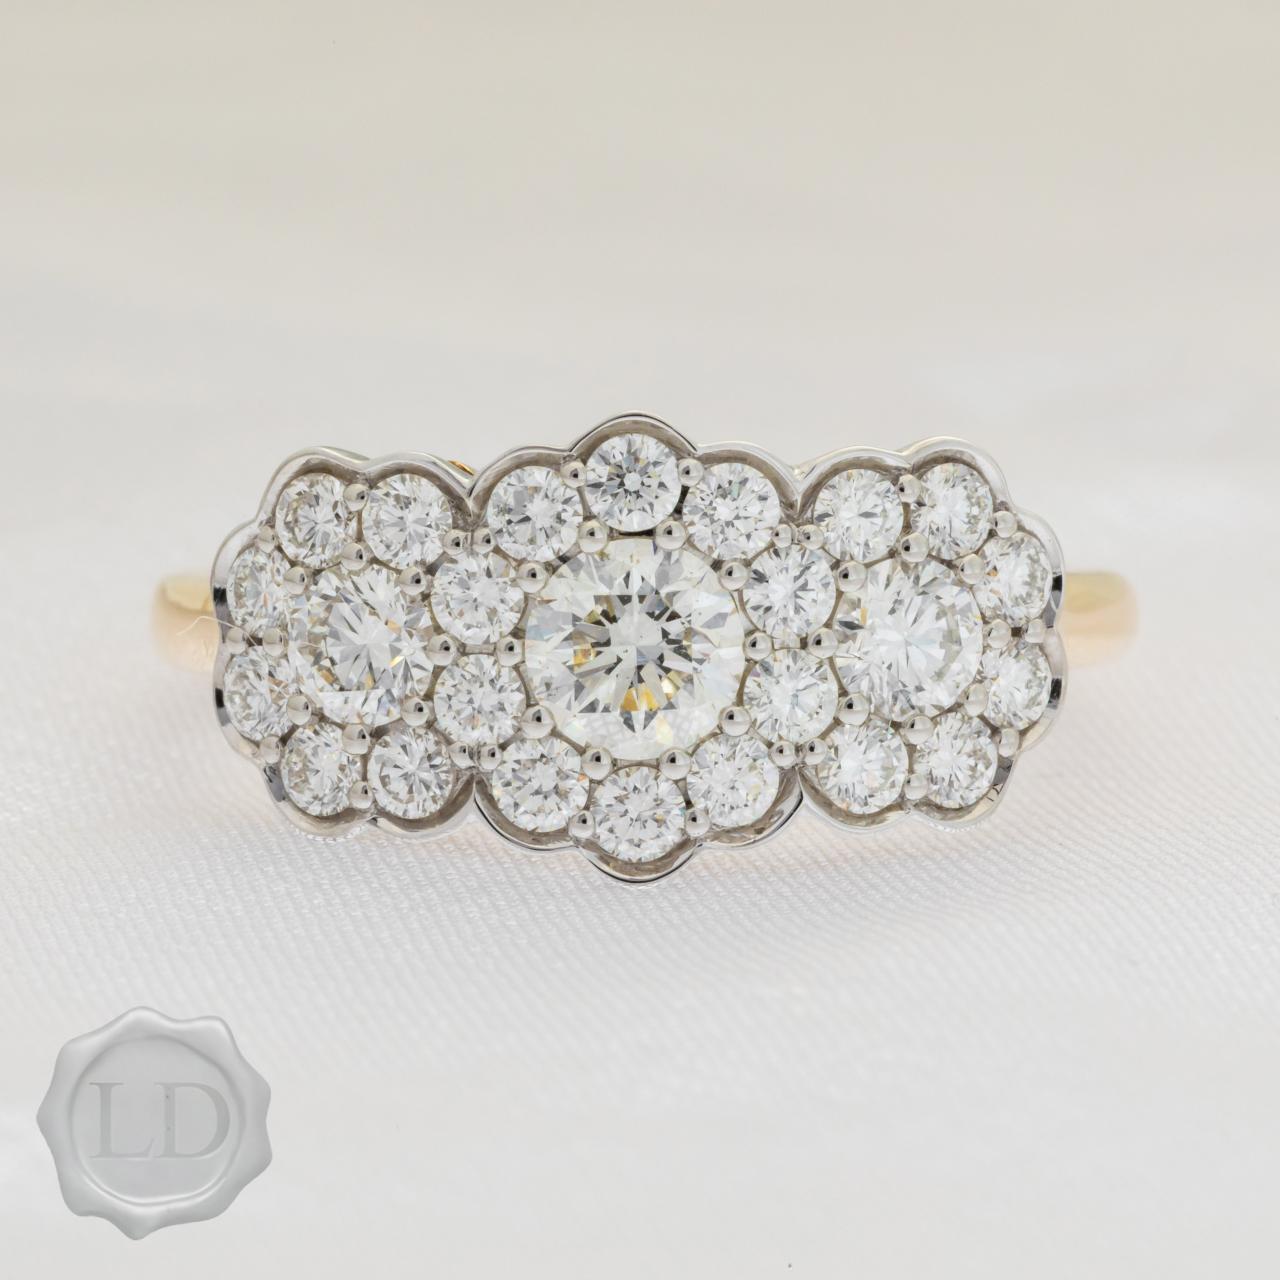 Diamond forget-me-not ring, yellow